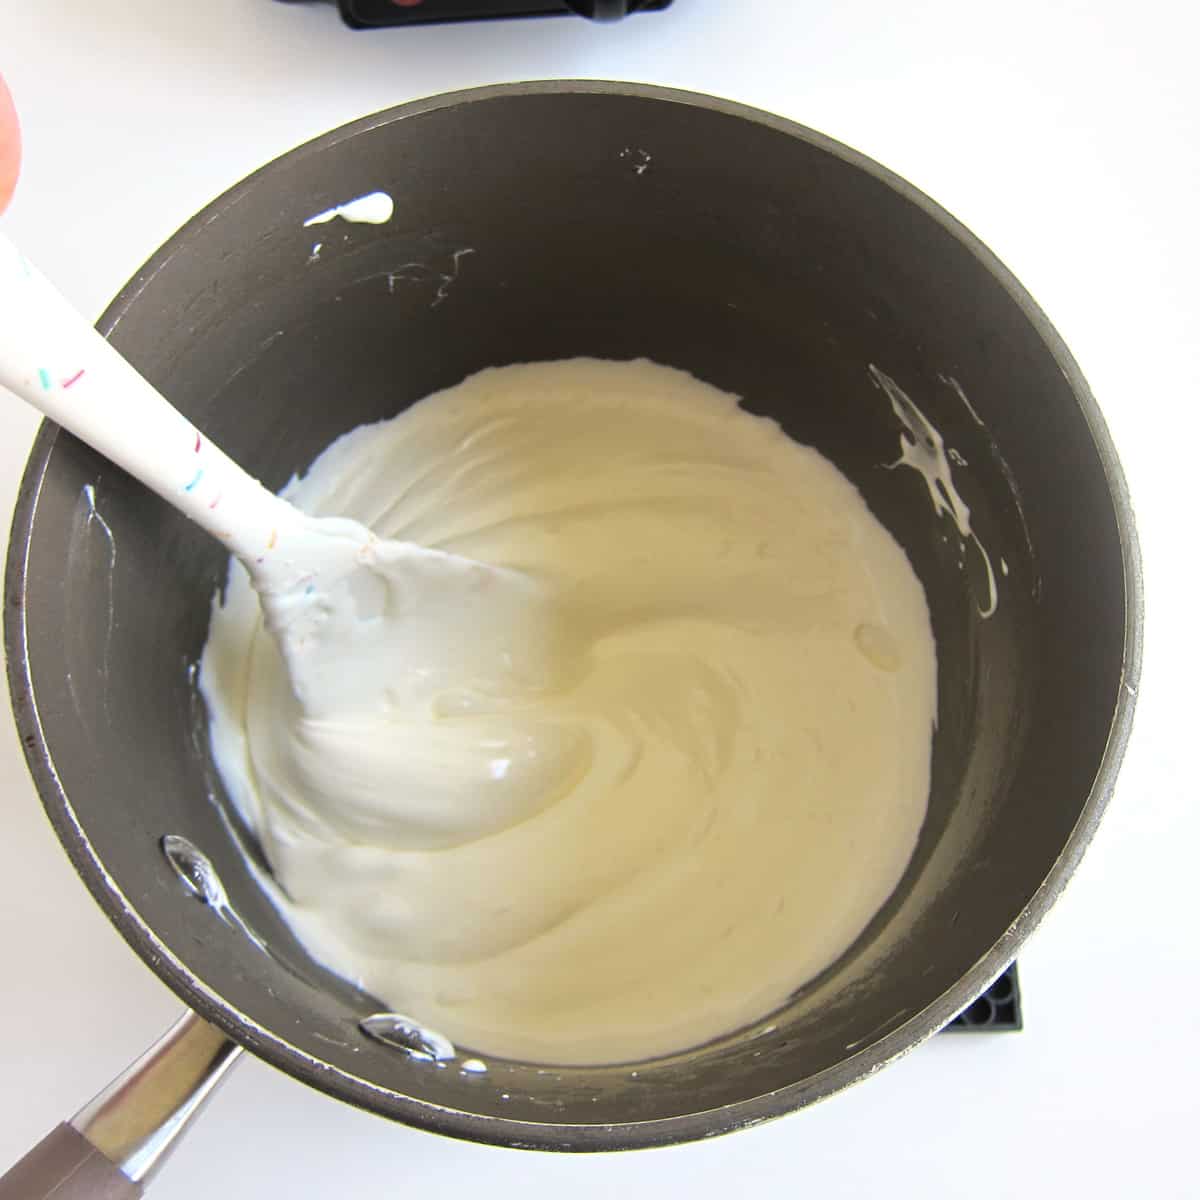 Creamy melted coconut oil and marshmallows stirred with a silicone spatula in a saucepan.